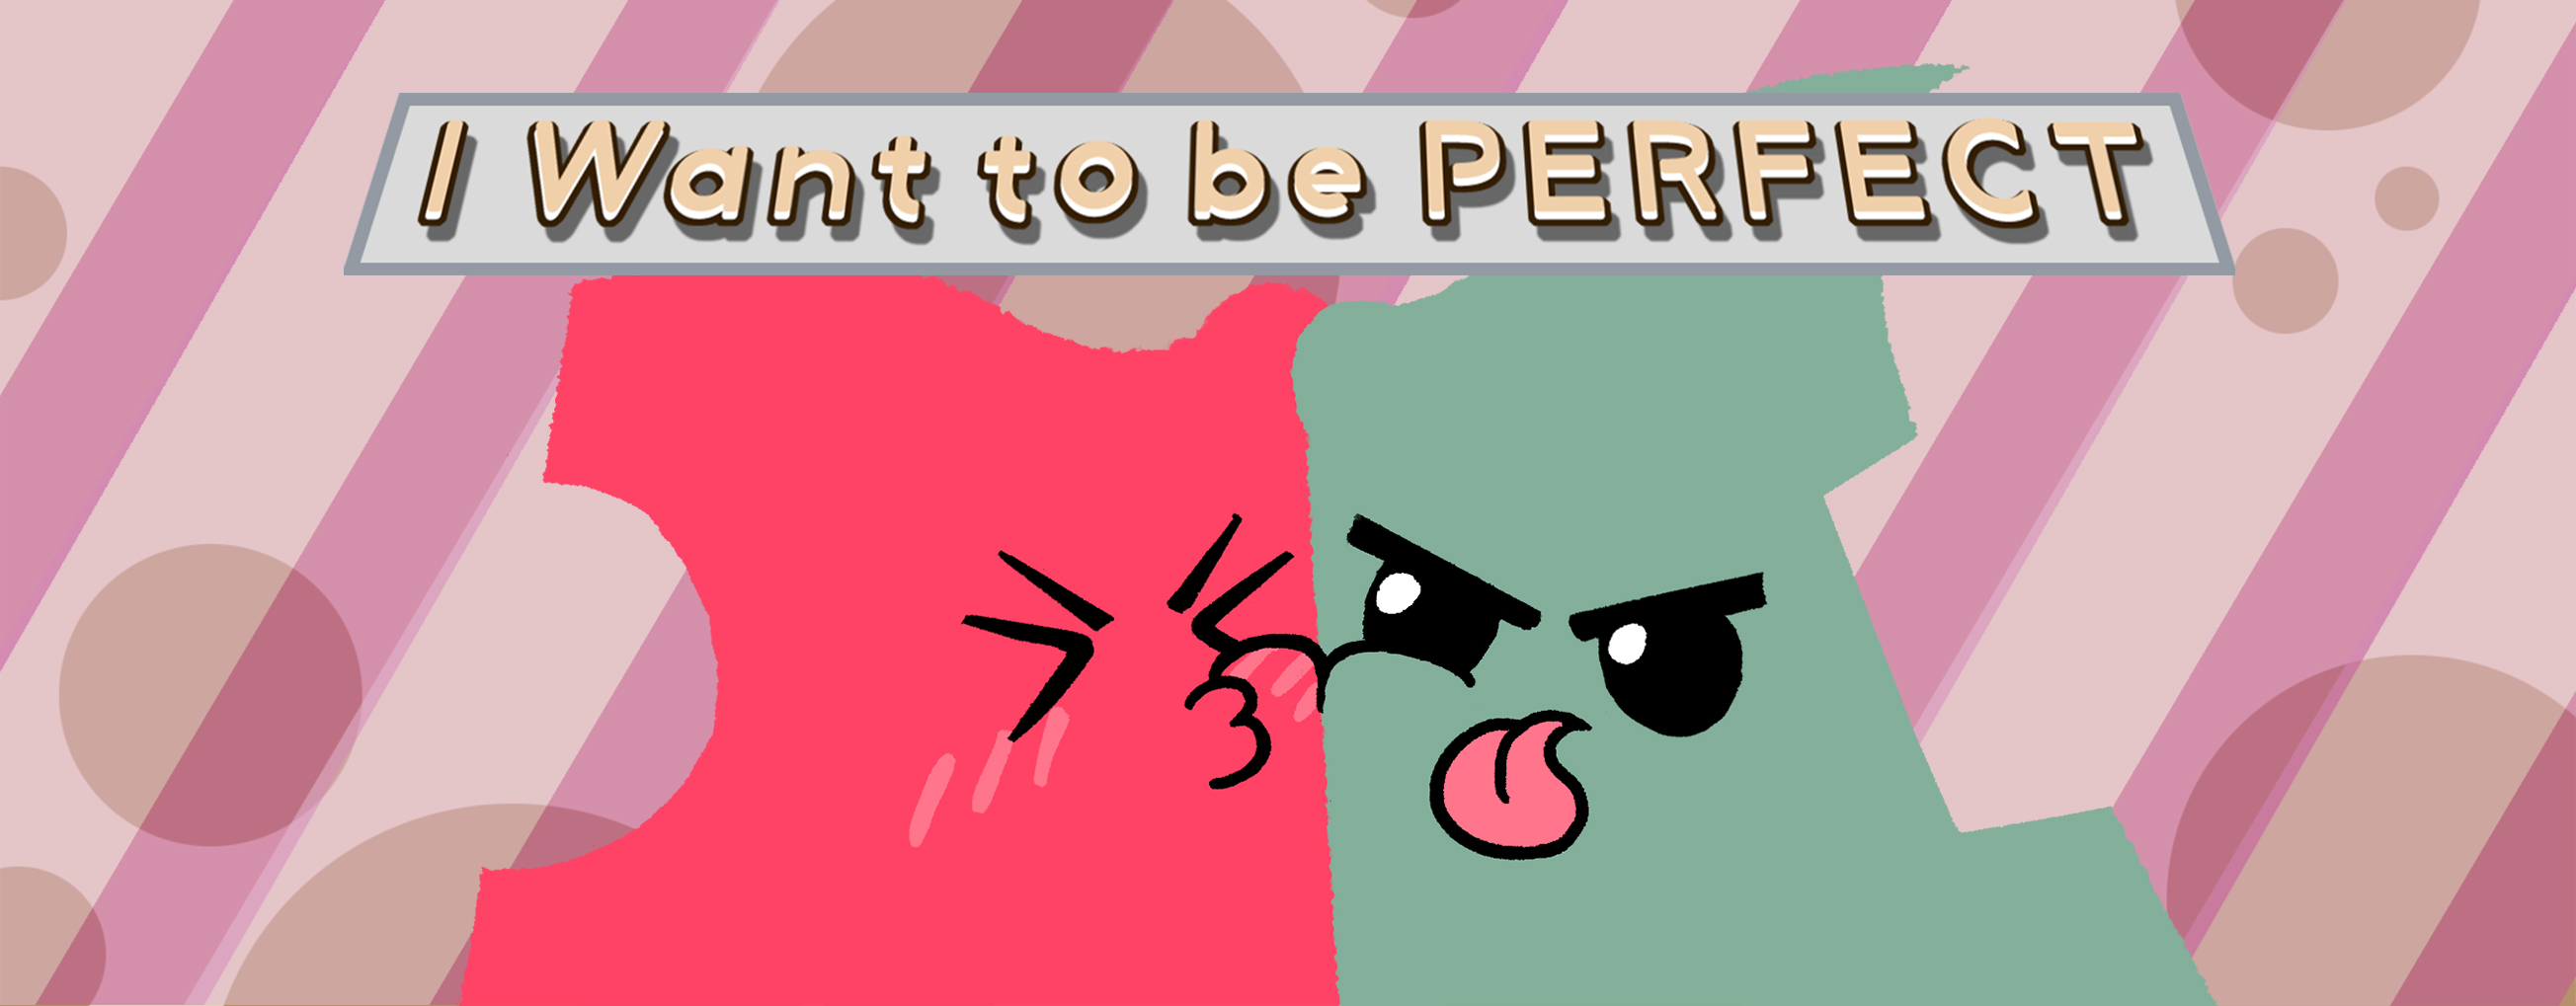 I want to be perfect